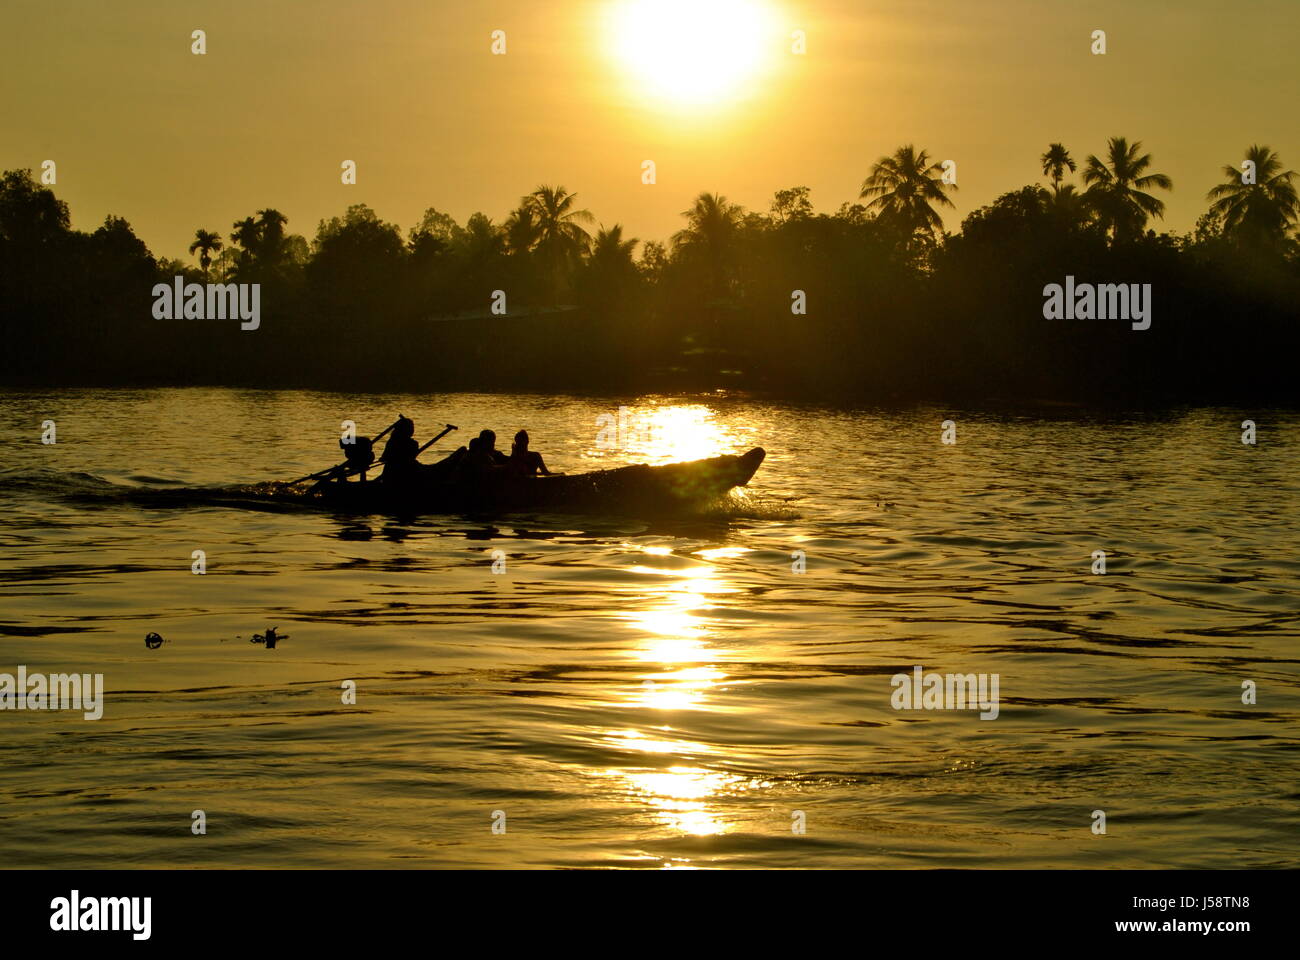 Sunrise on the Mekong River, Can Tho, Vietnam Stock Photo